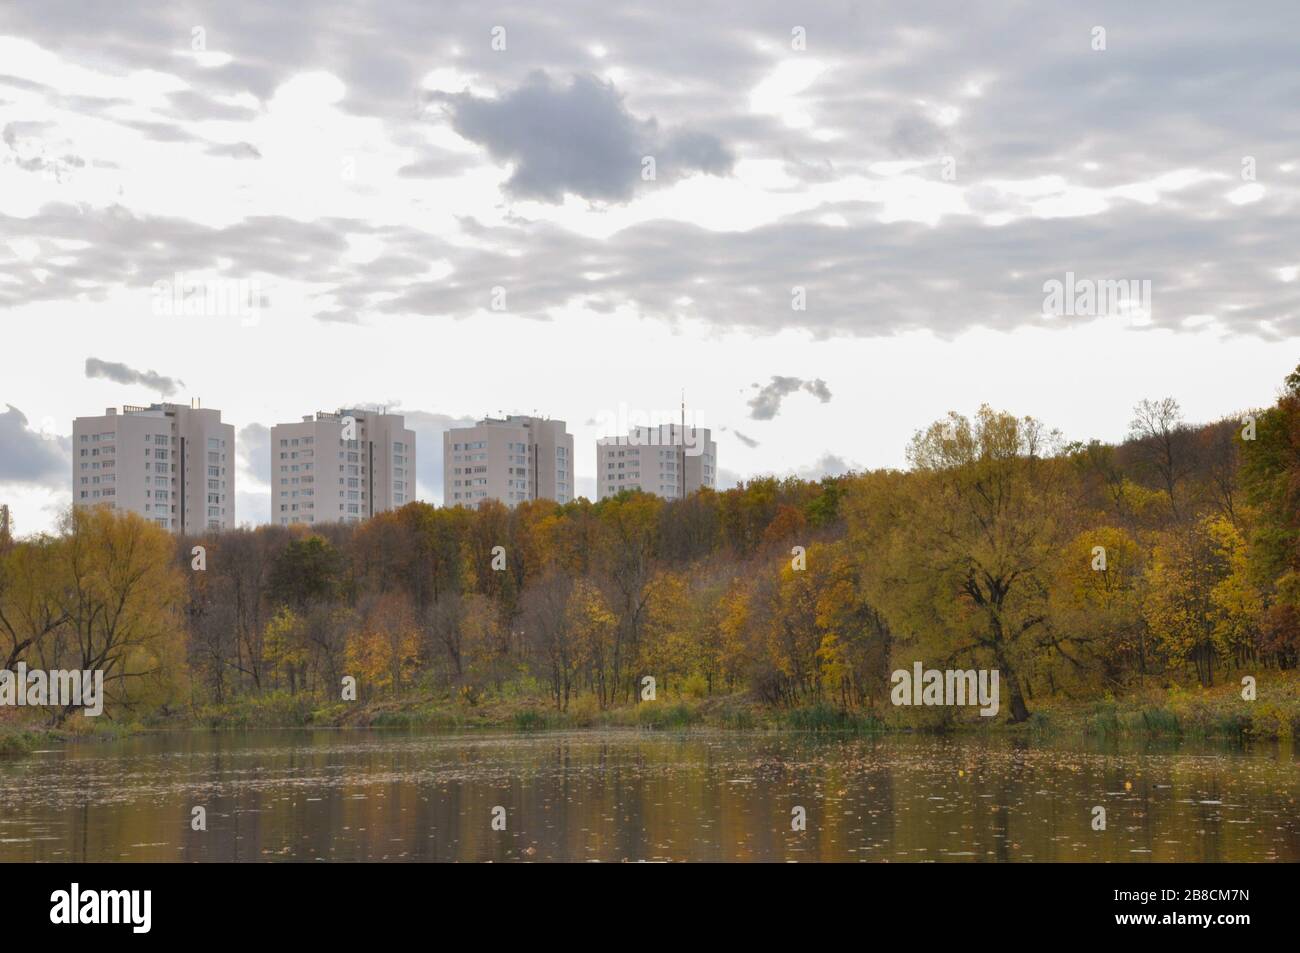 Landscape in cloudy october day with pond and trees in the foreground and several multi-storey buildings in the background. Stock Photo